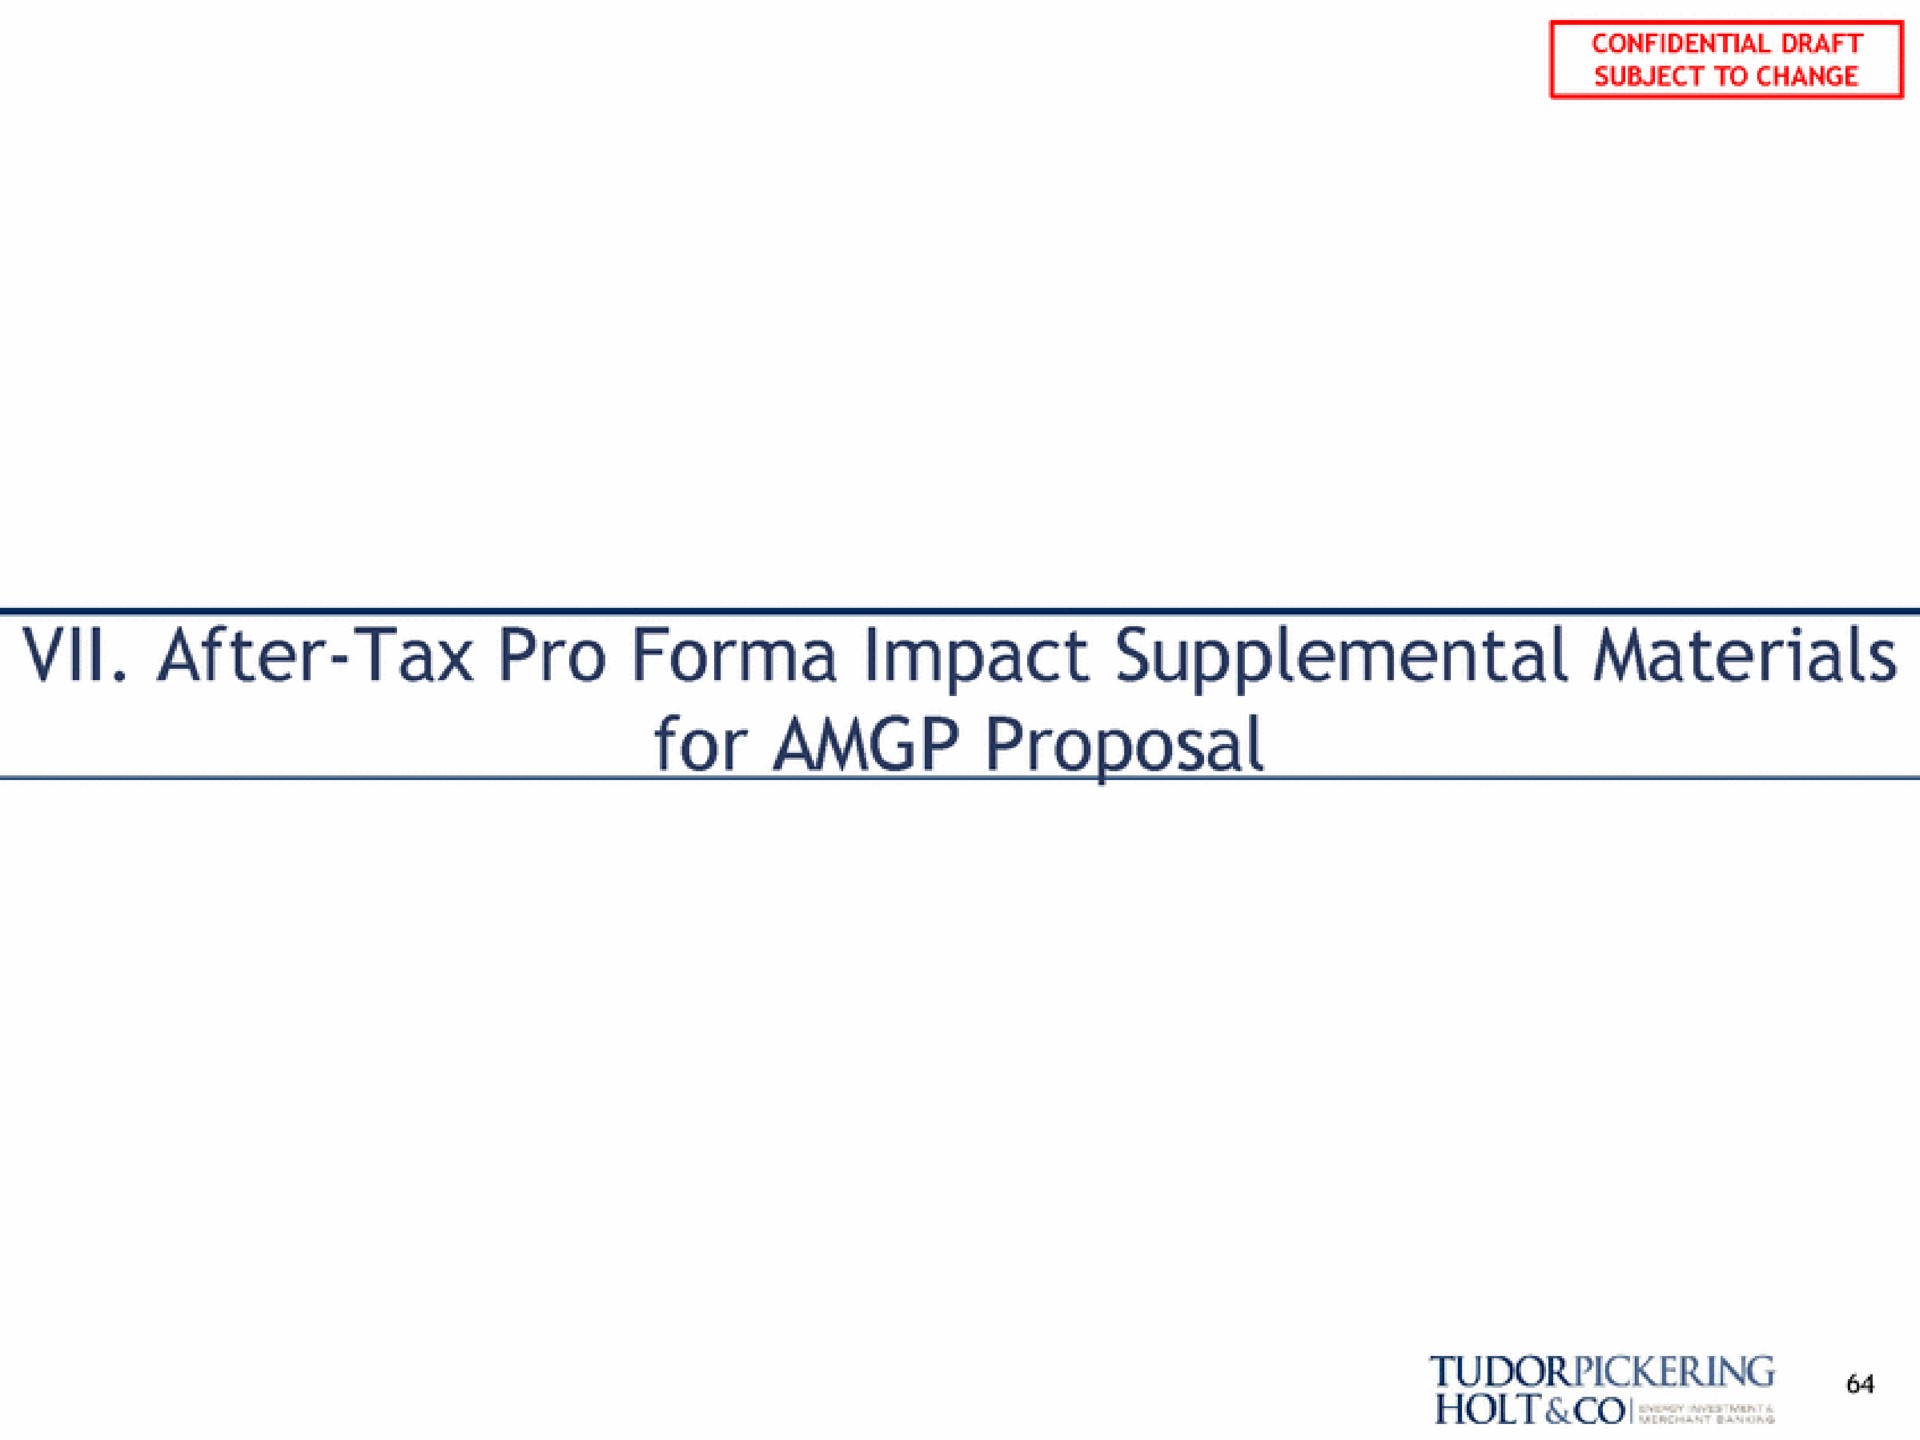 after tax pro impact supplemental materials for proposal | Tudor, Pickering, Holt & Co